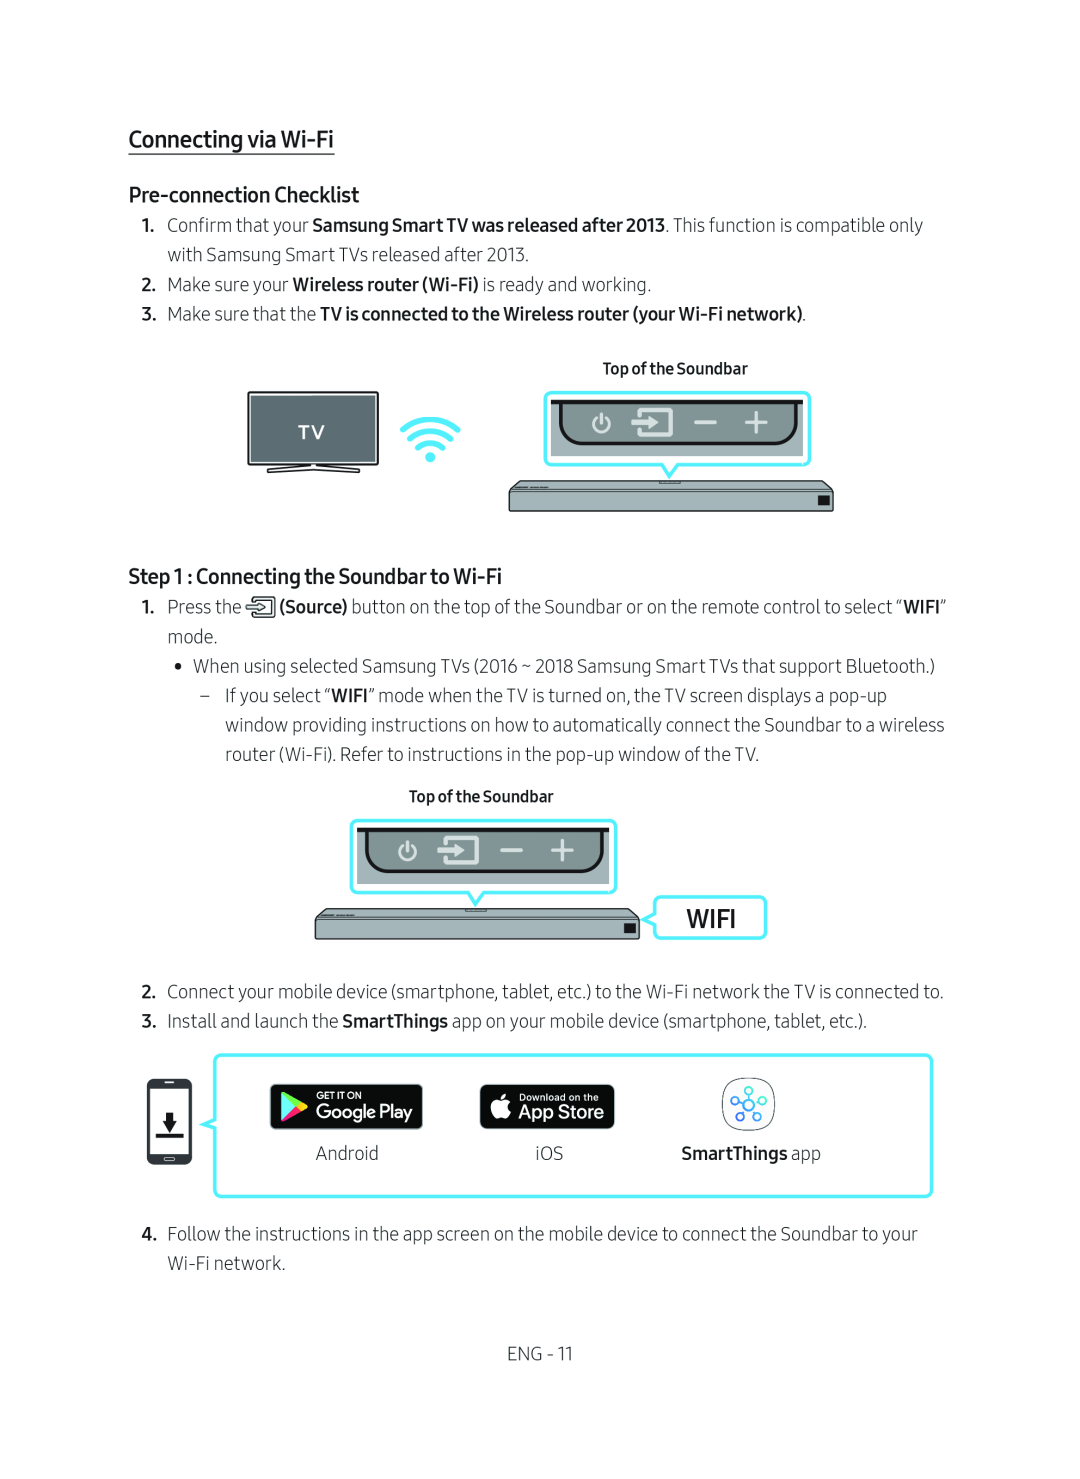 Pre-connectionChecklist Step 1 : Connecting the Soundbar to Wi-Fi